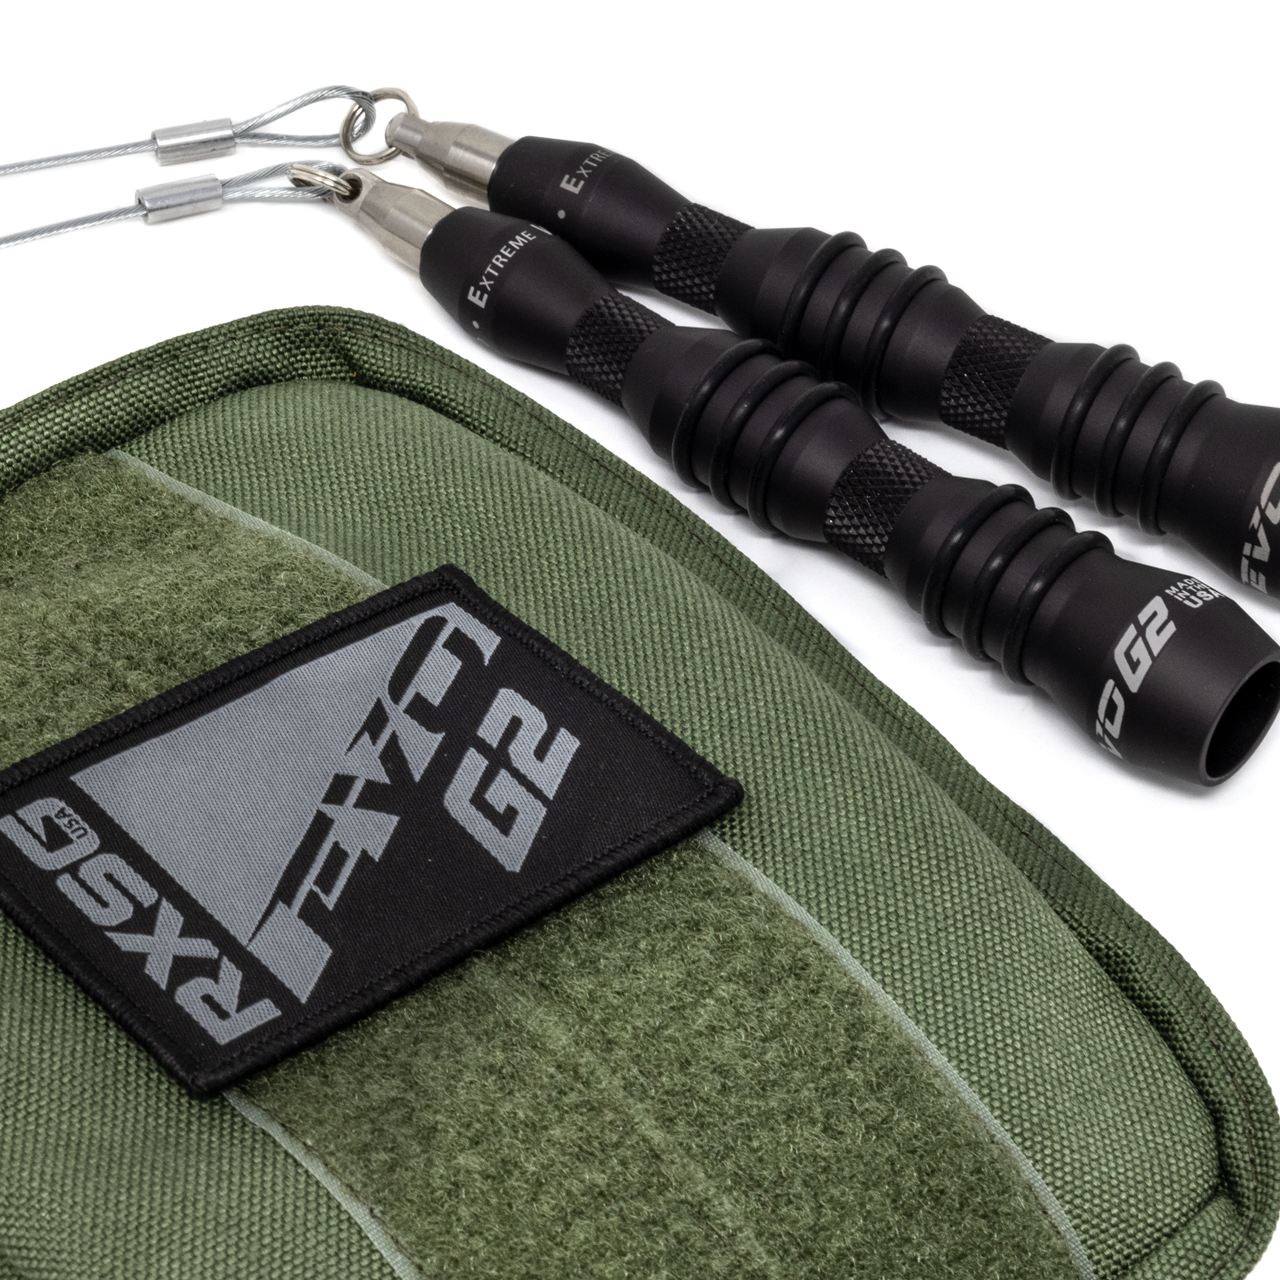 EVO G2 Speed Rope and patch